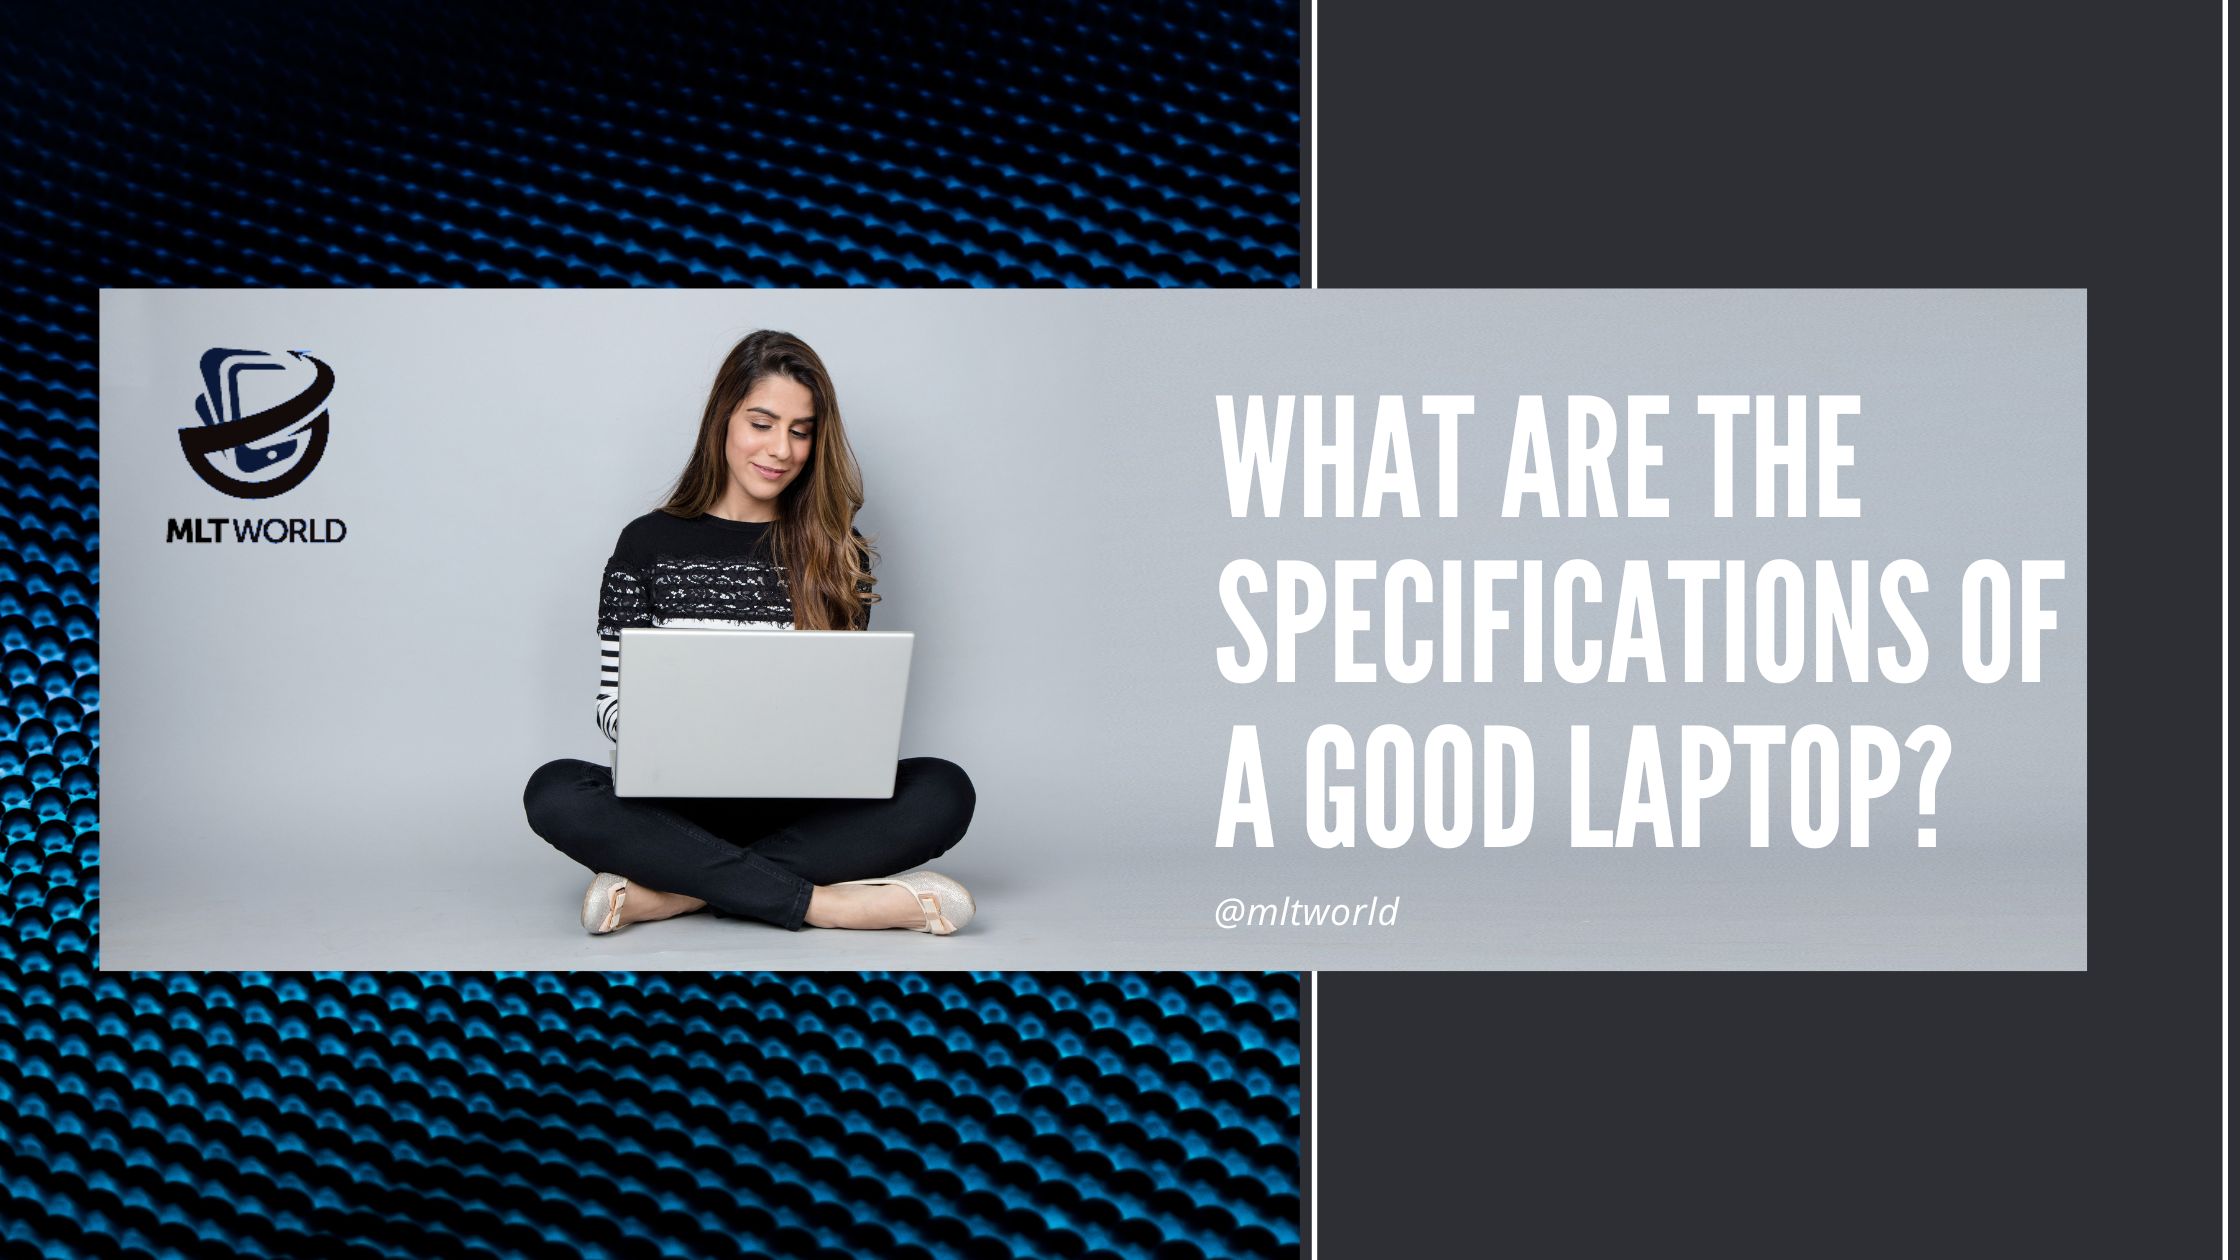 What are the specifications of a good laptop